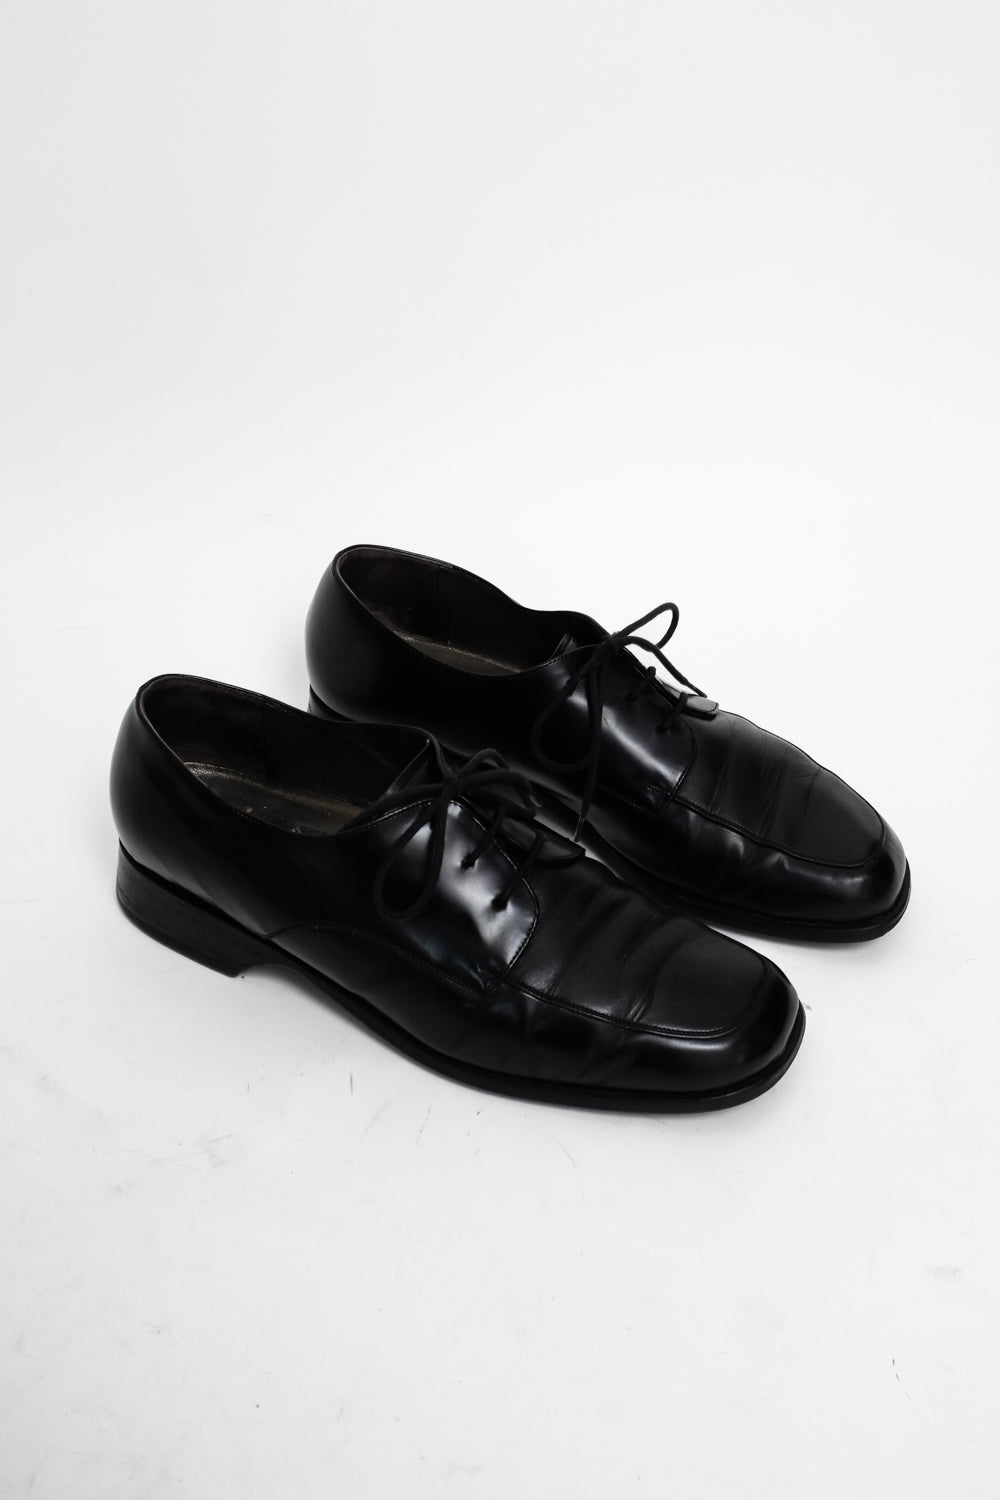 0063_BLACK 38 LEATHER BROGUES SHOES